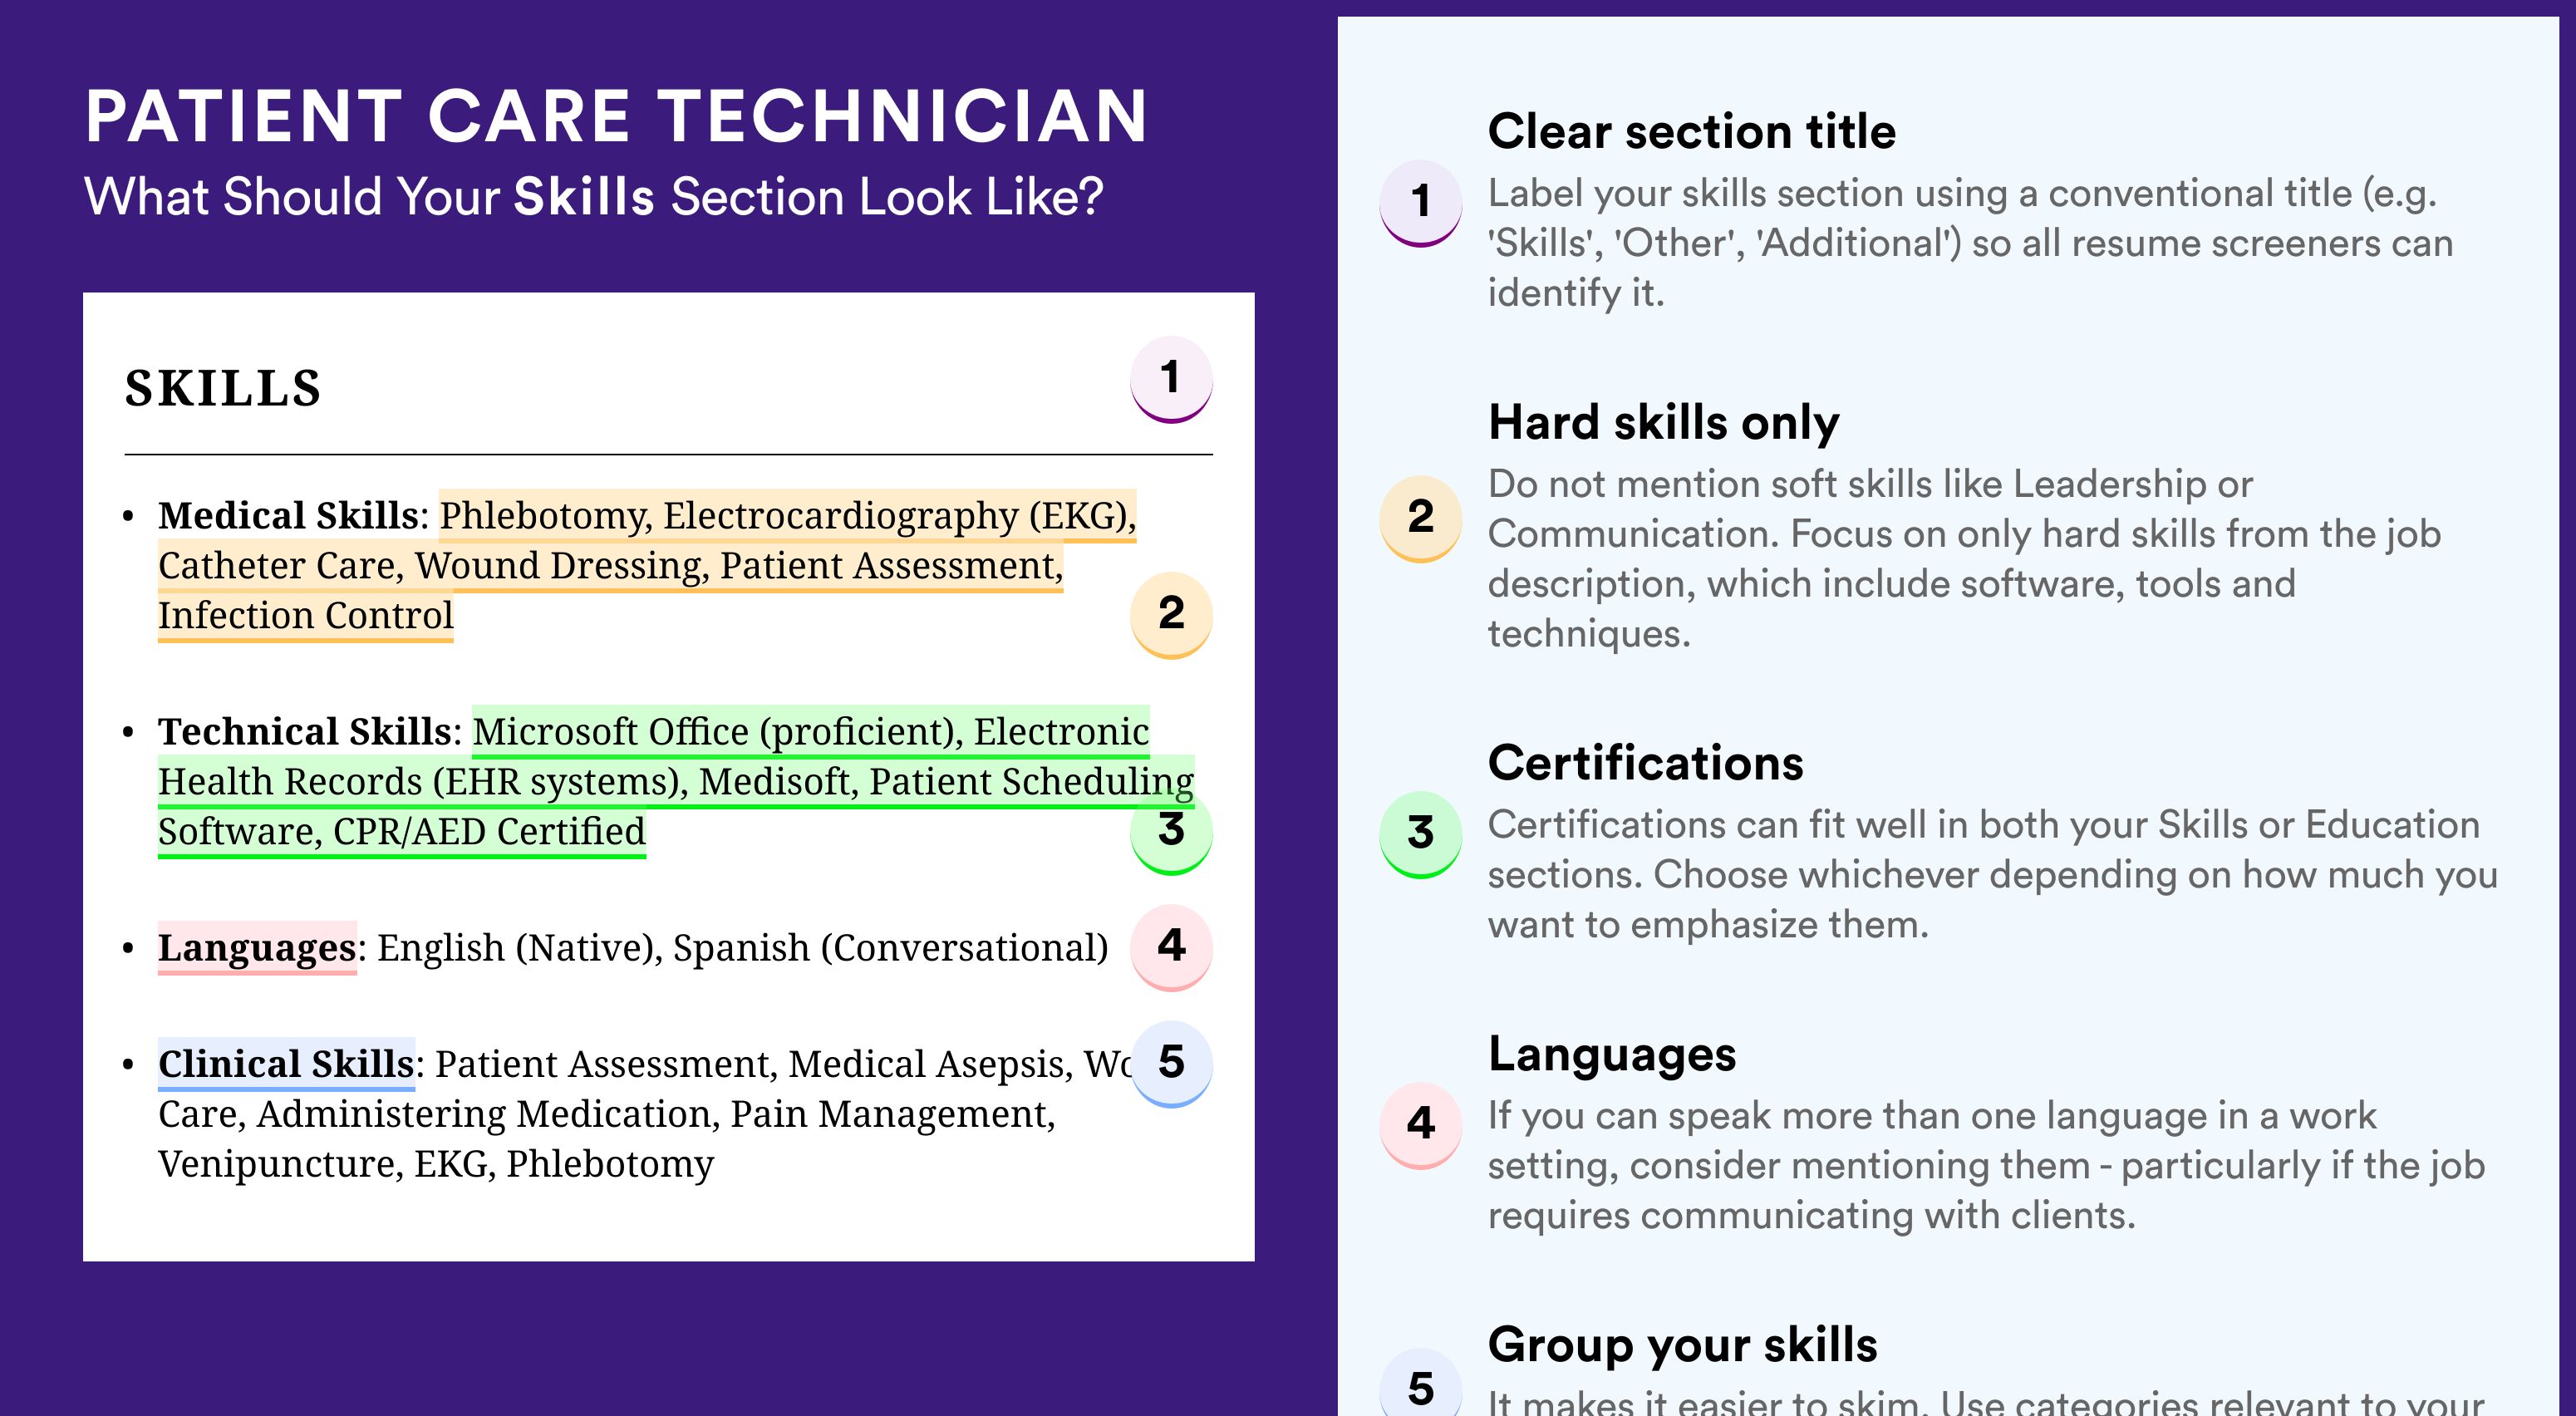 How To Write Your Skills Section - Patient Care Technician Roles